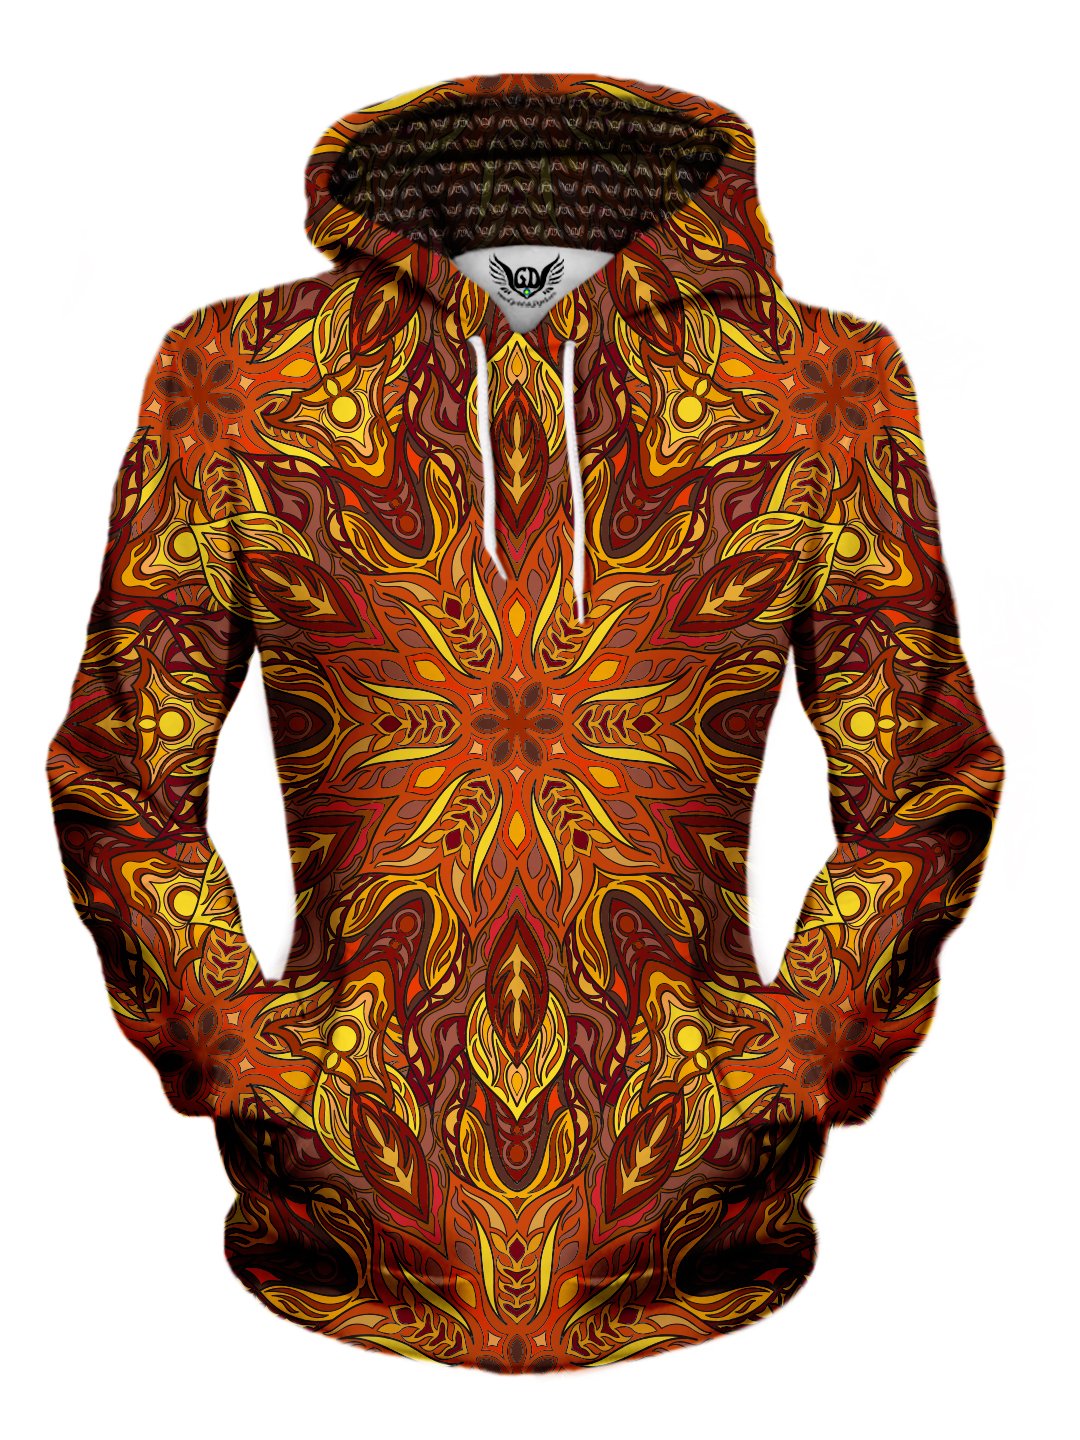 Women's front view of trippy mandala pullover hoodie.